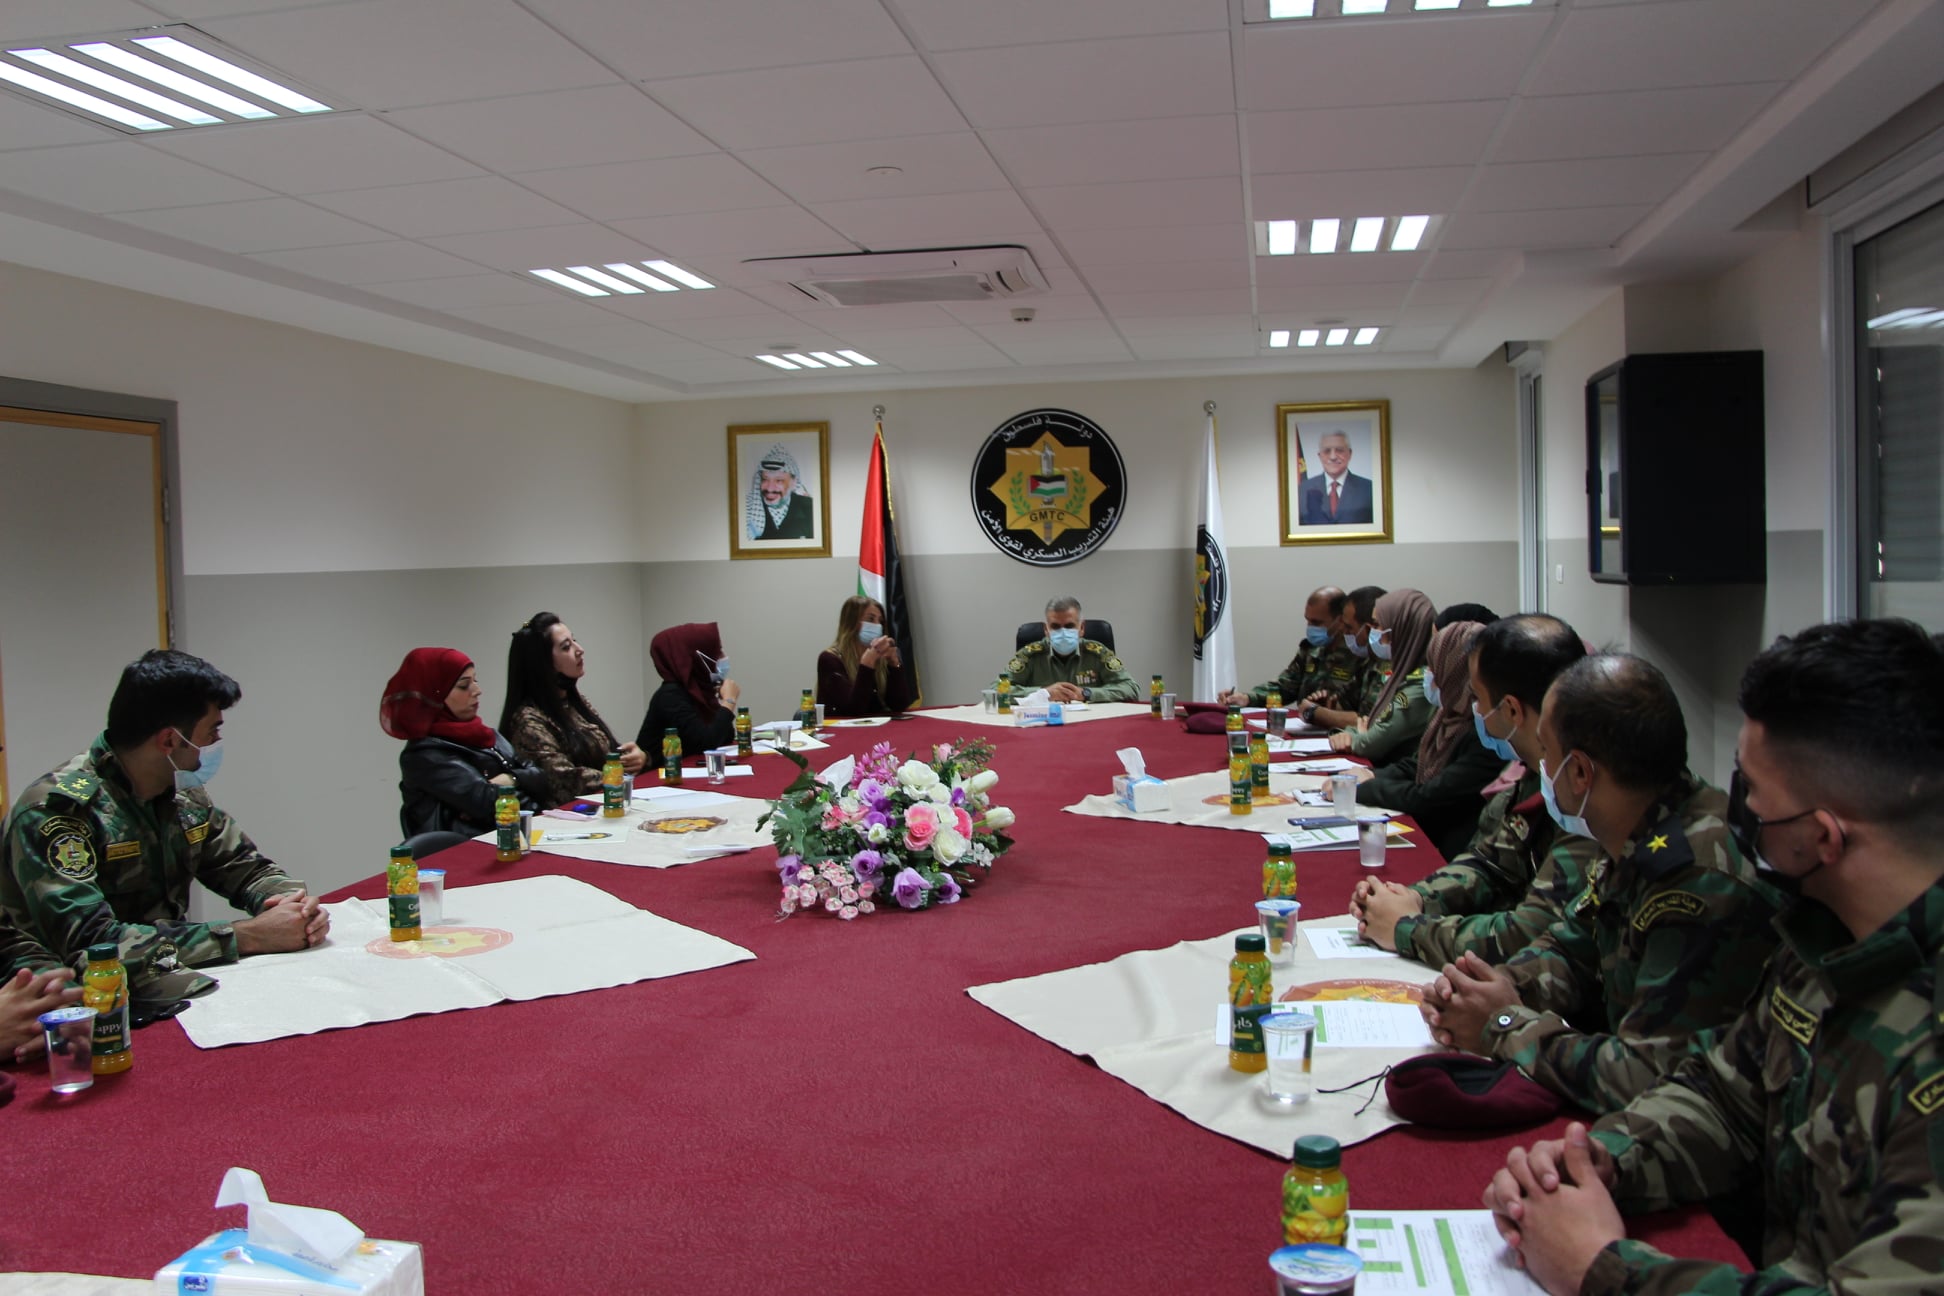  “Men are Partners in Change – ADWAR and the Military Training Authority is holding a meeting in Jericho